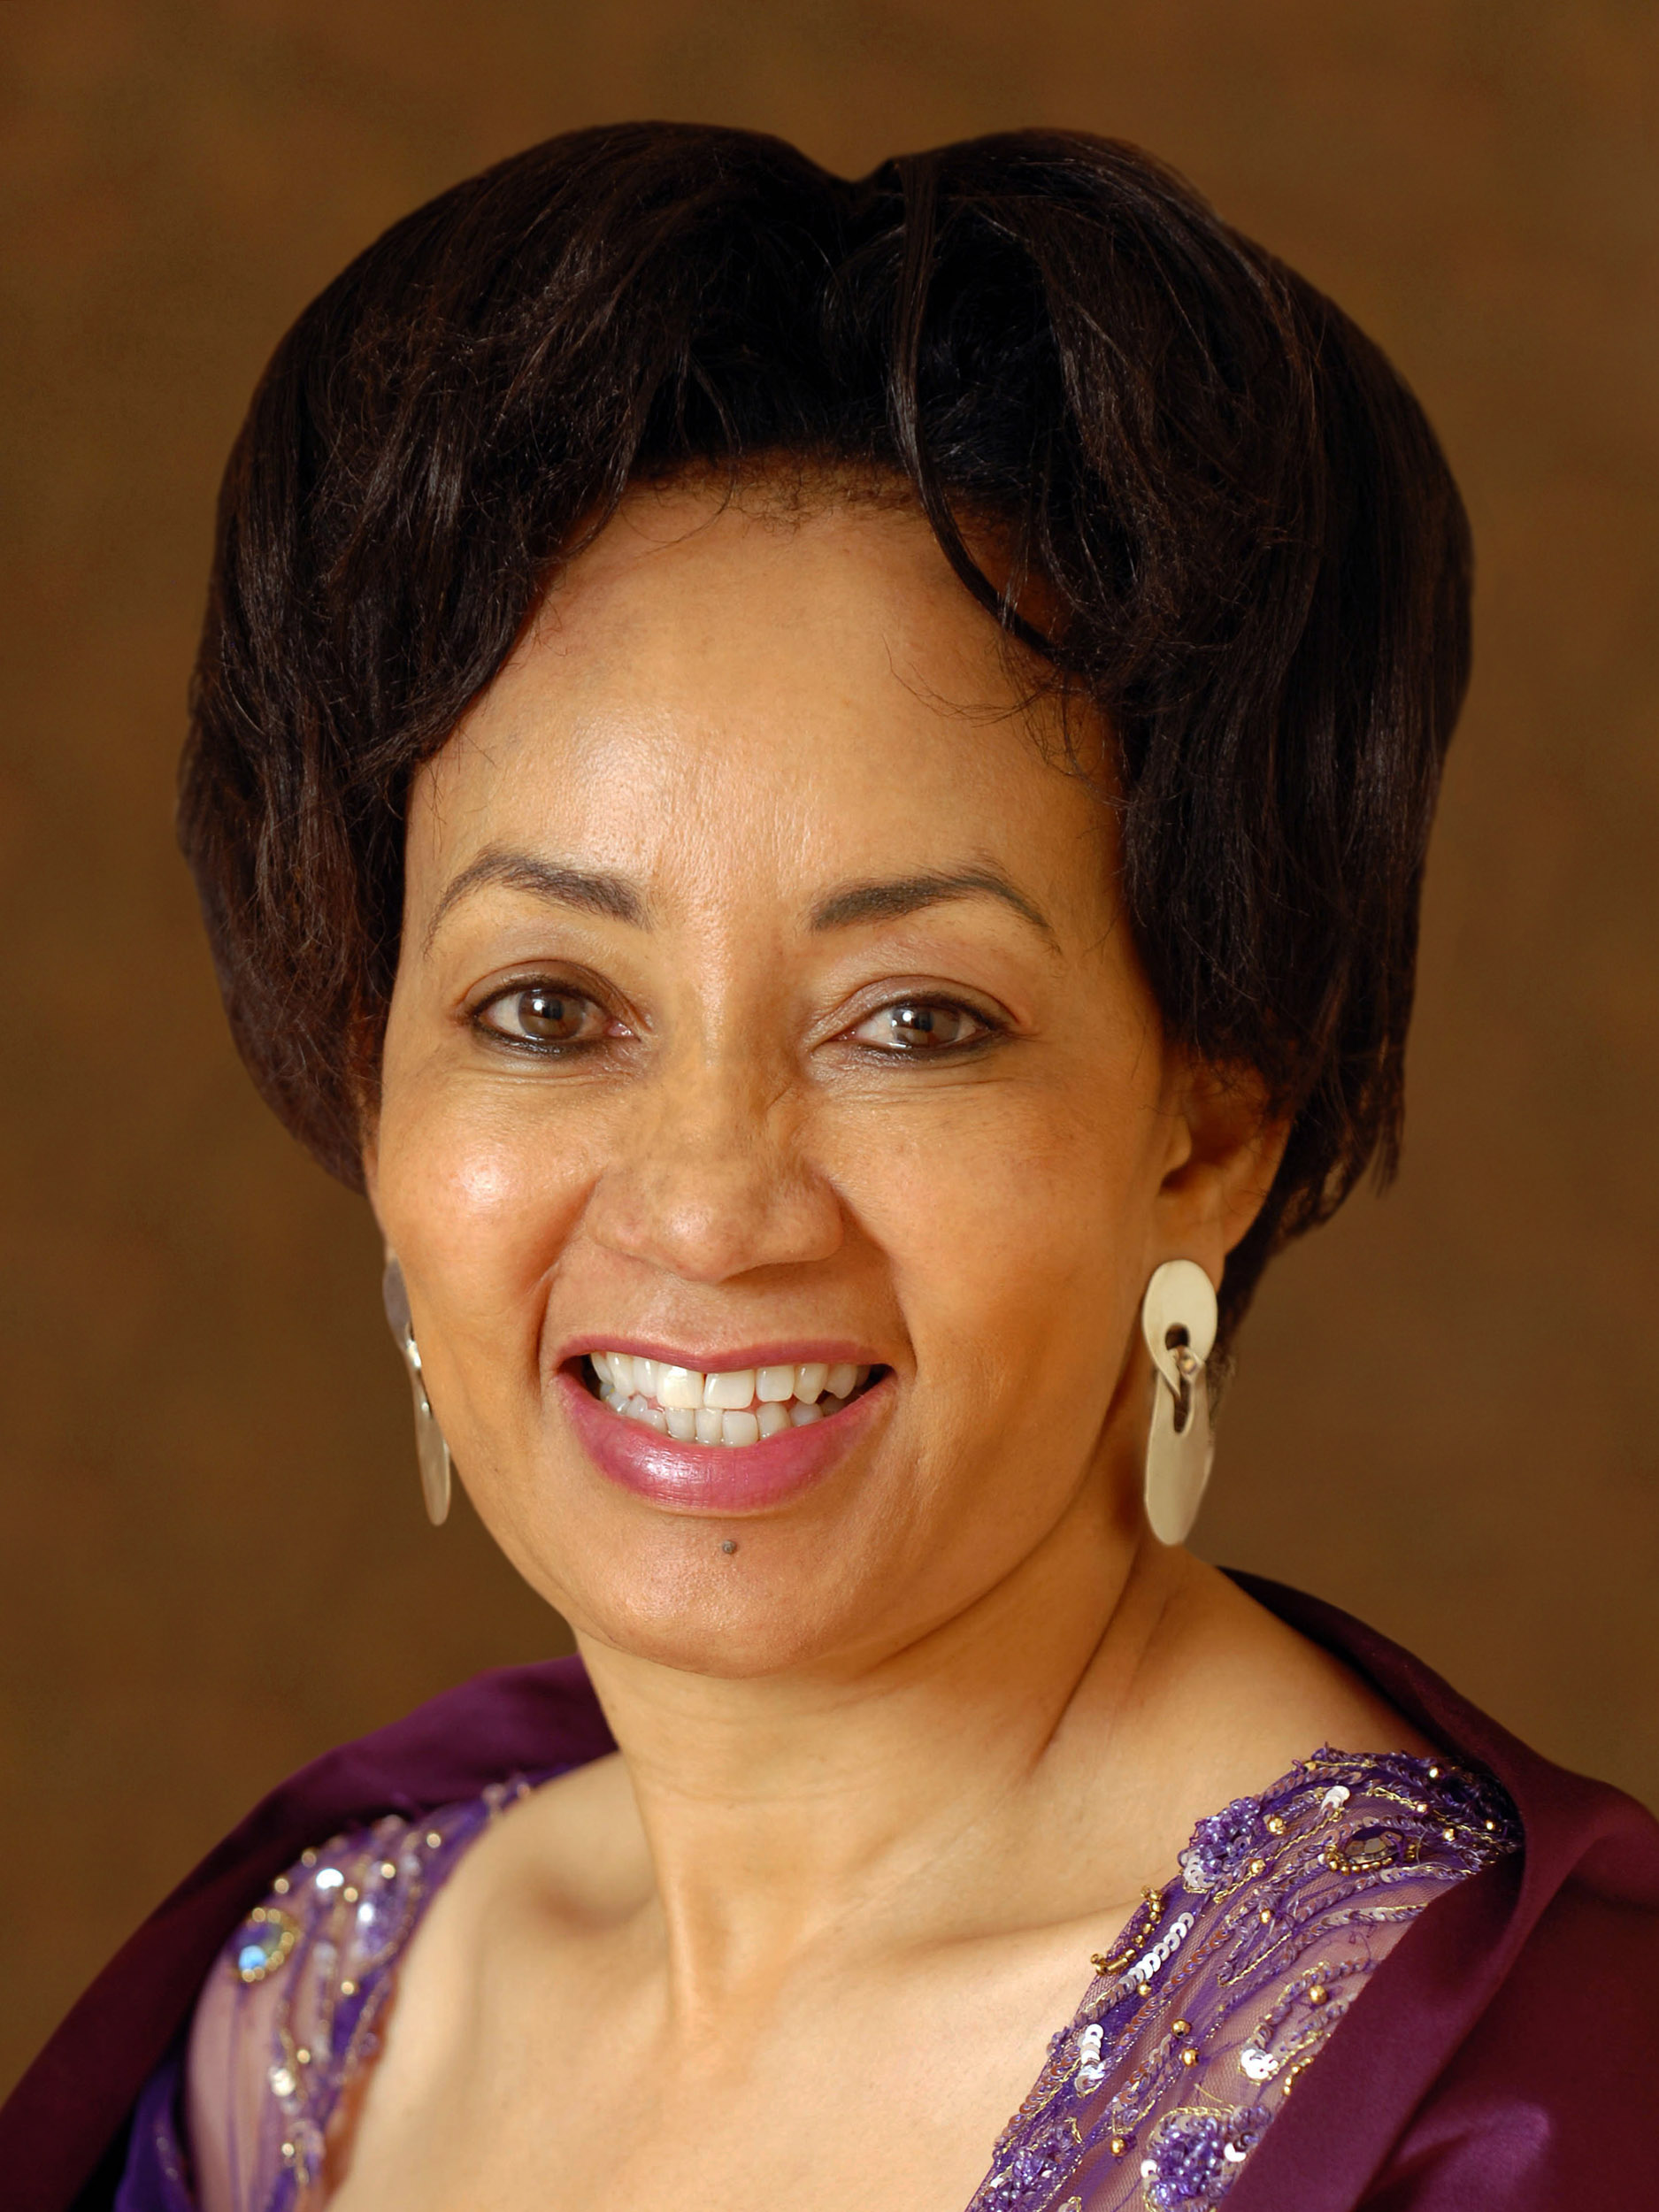 Portfolio Committee appreciates Minister of Tourism Lindiwe Sisulu’s intervention on issues raised by the Auditor General